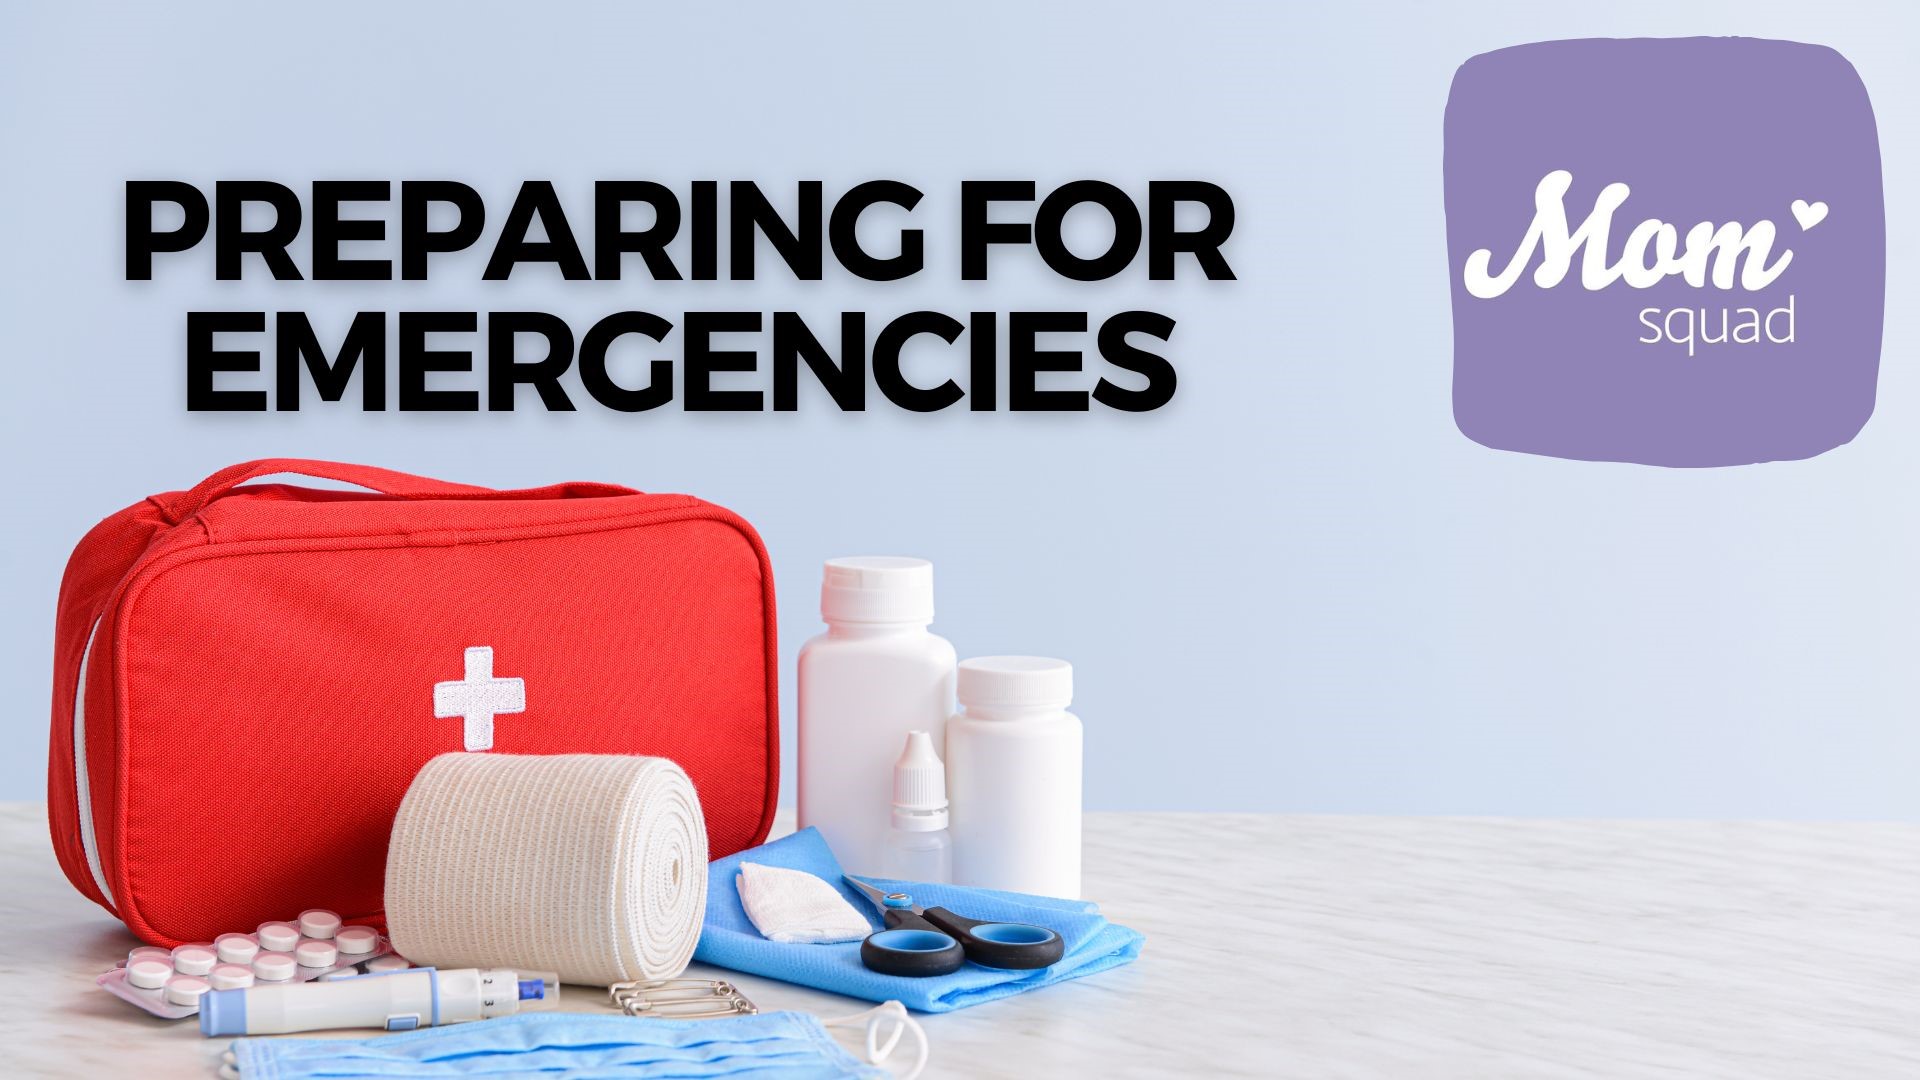 Maureen Kyle has advice on what to do in emergencies with kids including if they swallow a button battery or lose an adult tooth. Plus other way to get prepared.